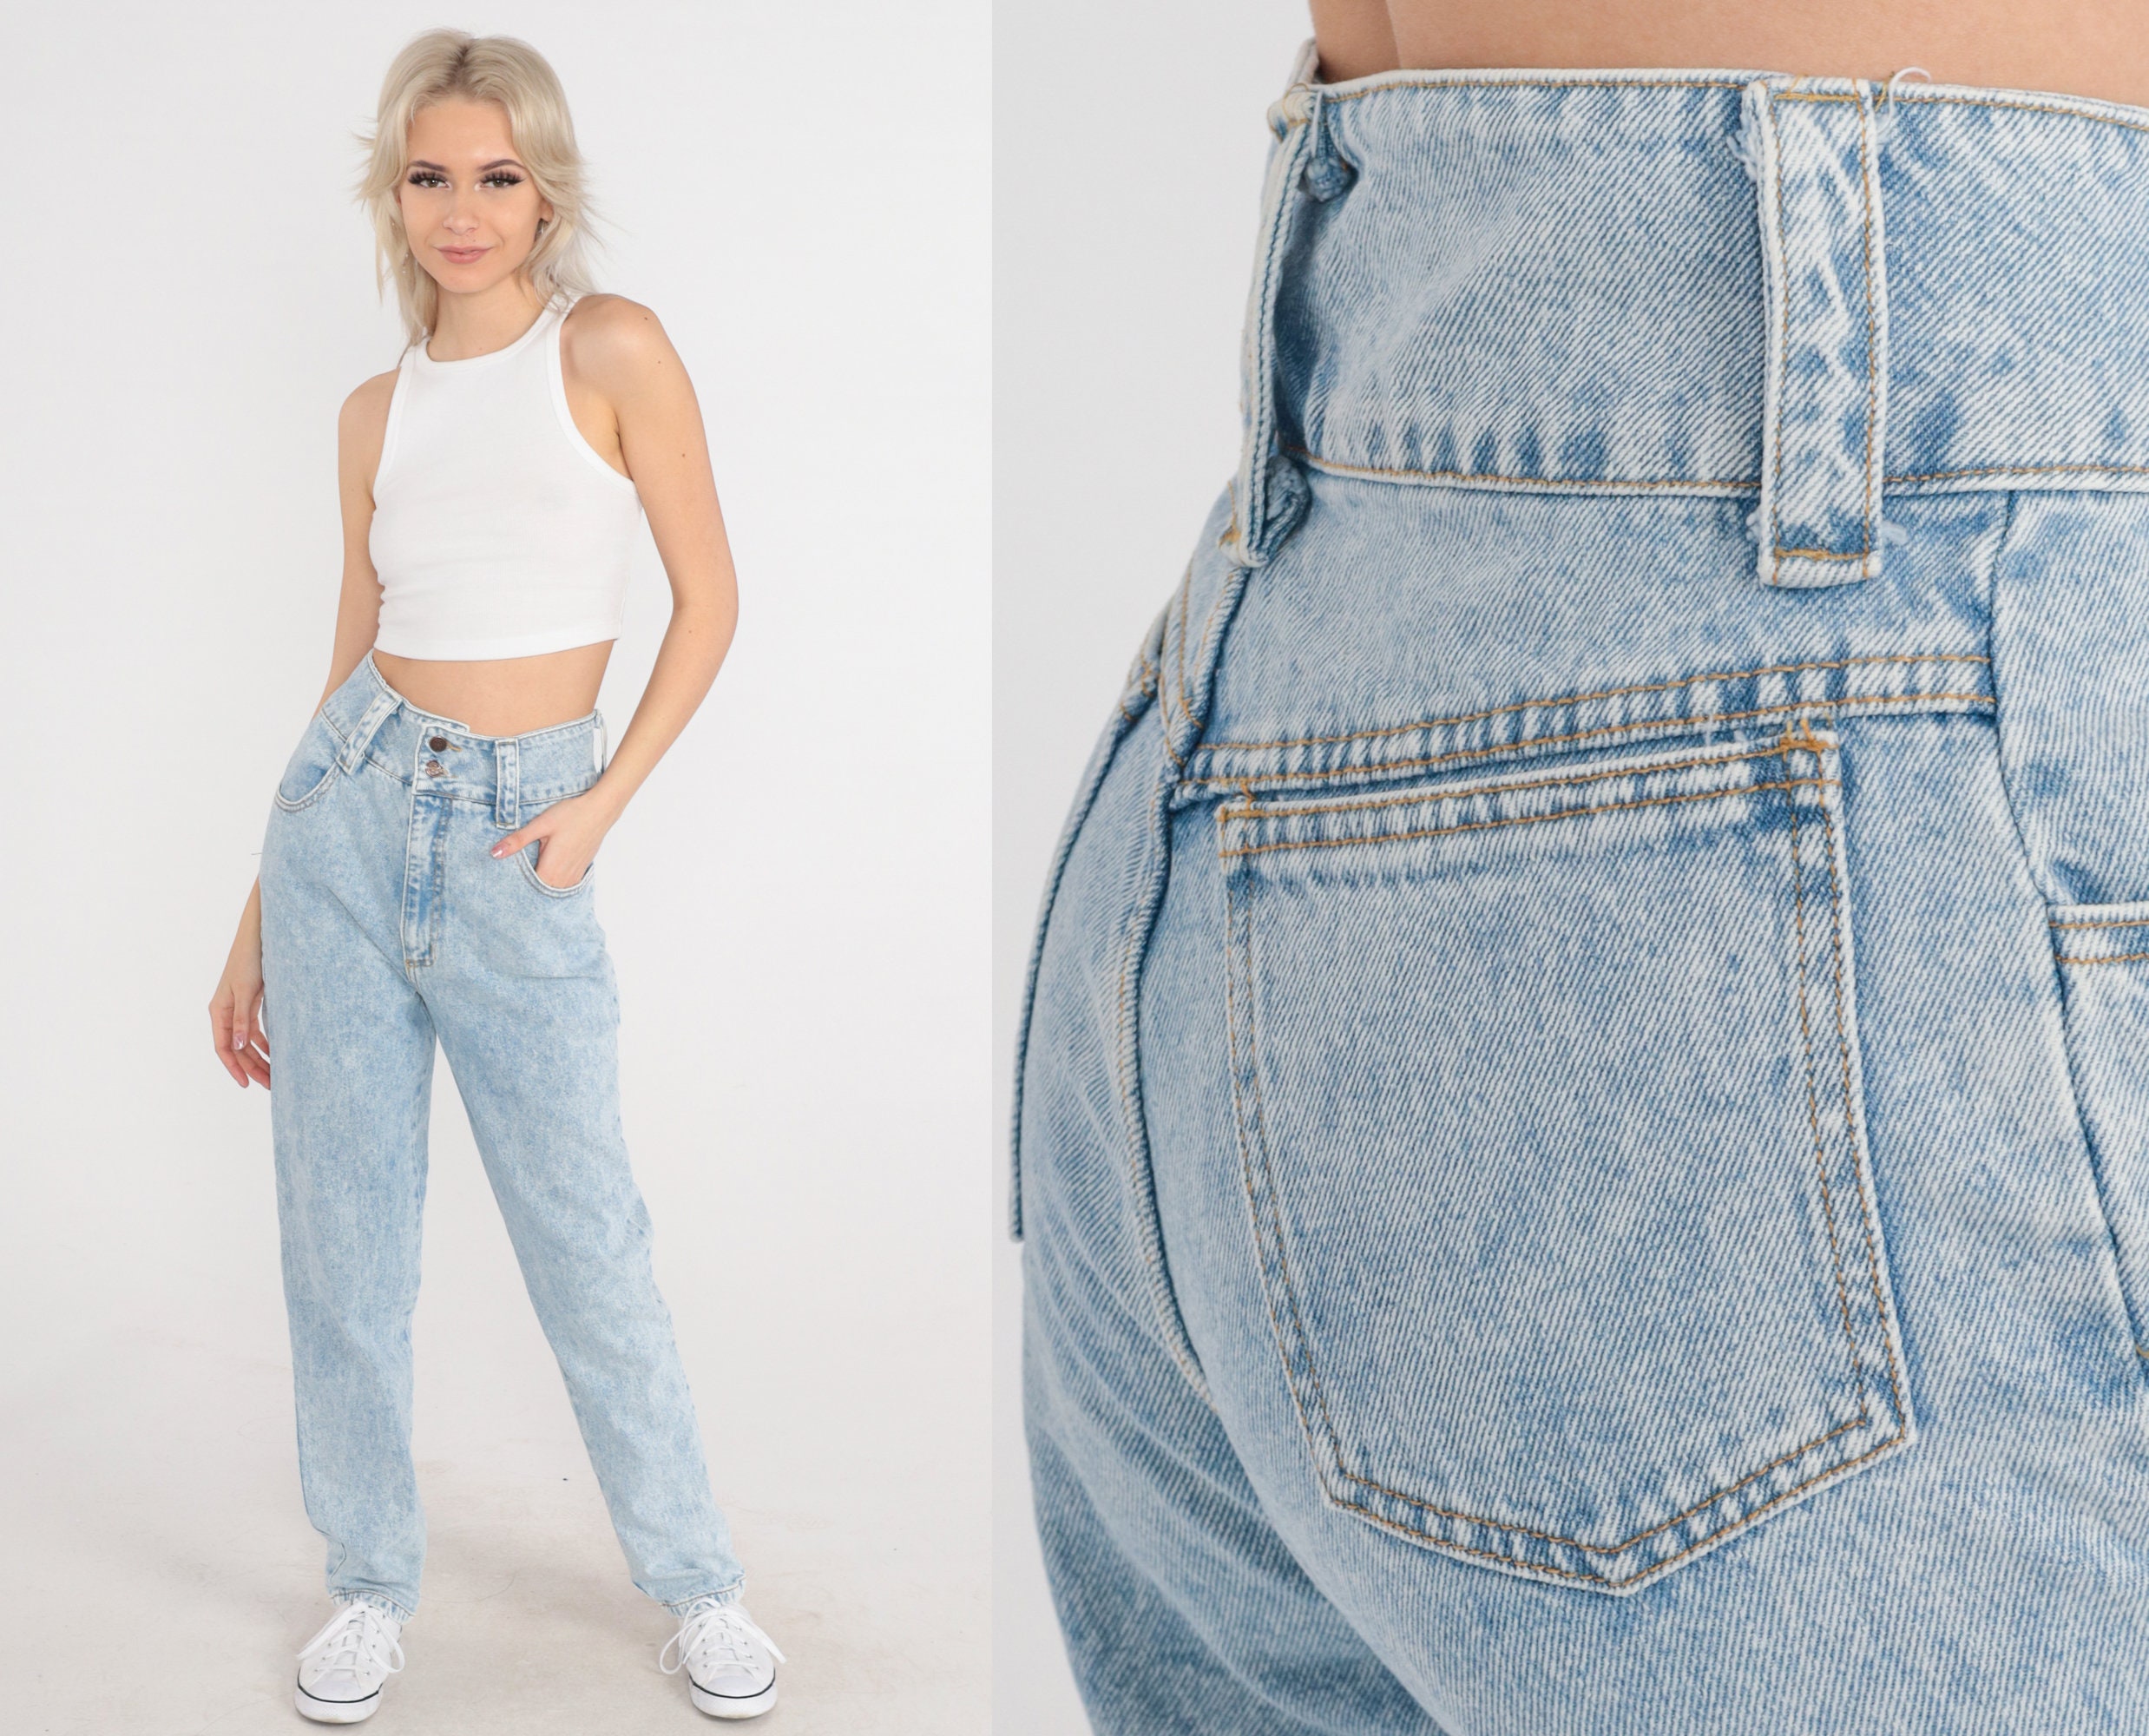 Acid Wash Jeans 80s Ultra High Waist Mom Jeans Denim High Waist Jeans 1980s  Tapered Denim Pants Vintage Frederick's of Hollywood Small 27